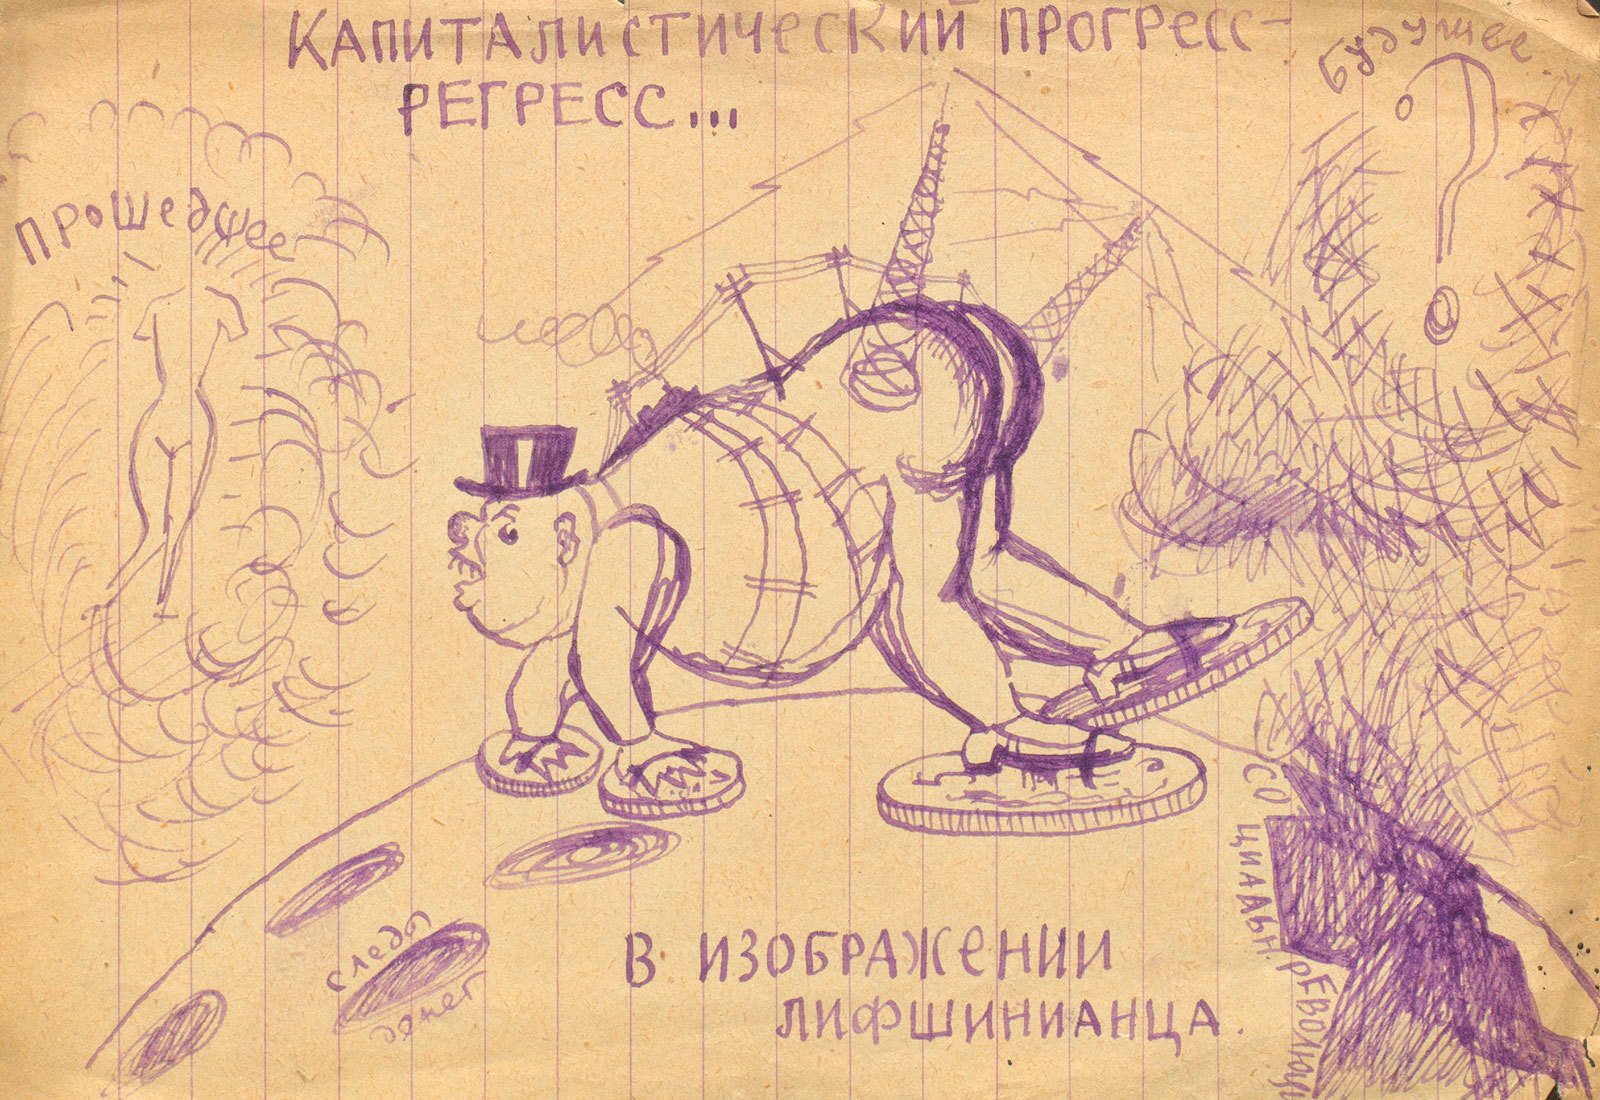 Vladimir R. Grib Realistic fantasies (grotesques and caricatures), Capitalist progress-regress in the depiction of the Lifshitsian.Drawing (caricature)Courtesy The Russian State Archive of Literature and Arts